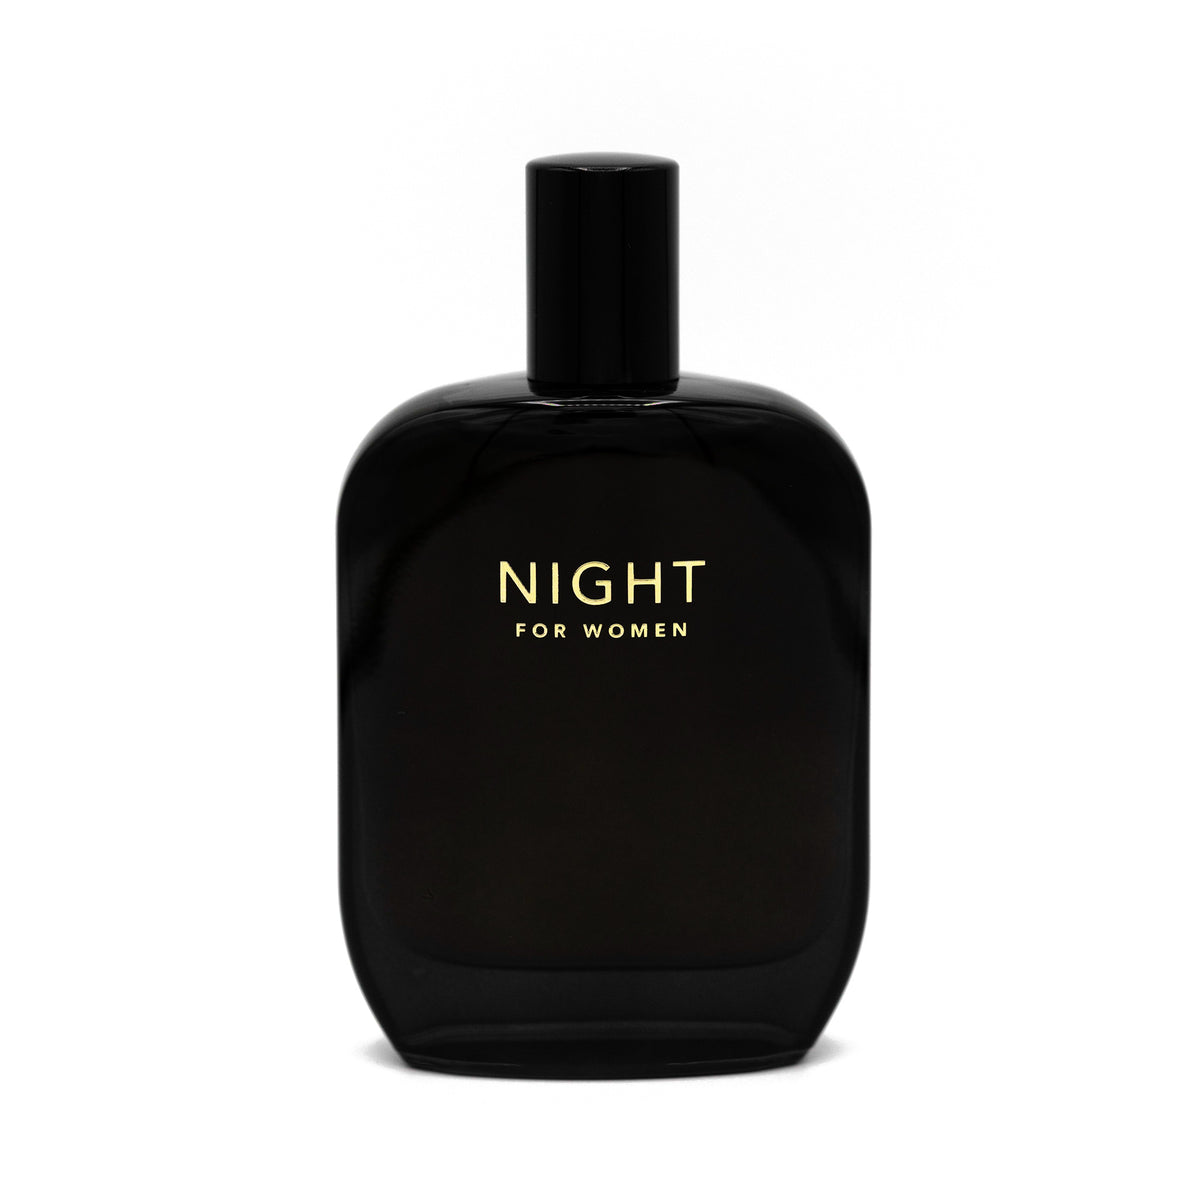 NIGHT for Women - Own the Night